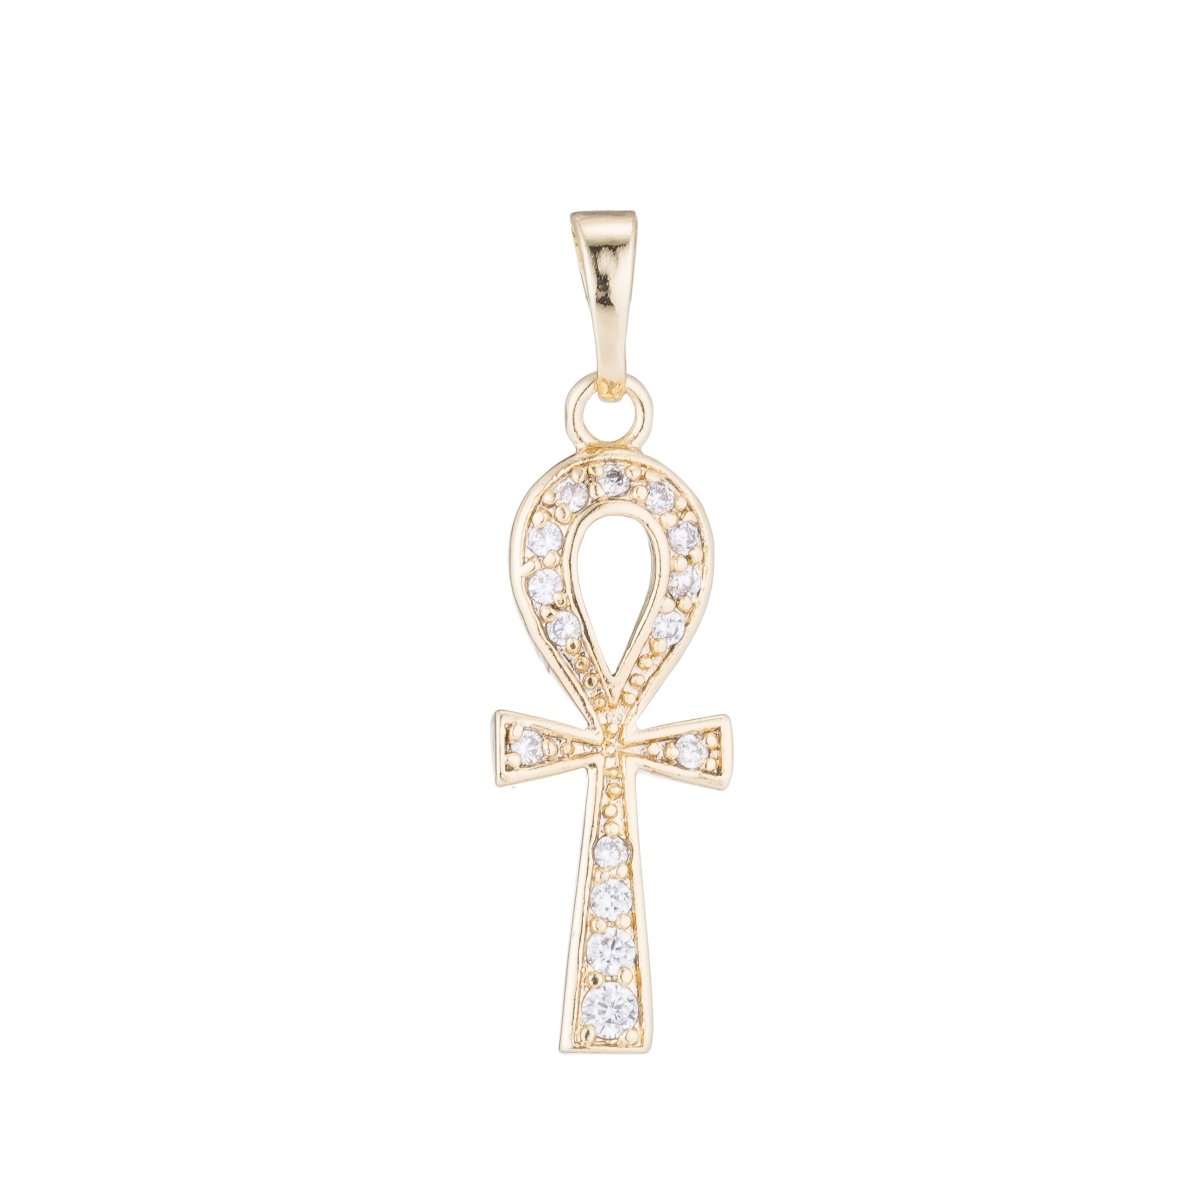 18K Gold Filled Ankh Cross, Key of Life, Symbol of Life, Egyptian Pantheon, Crux Ansata, Cubic Zirconia Necklace Pendant Charm Bead Bails for Jewelry Making H-681 - DLUXCA